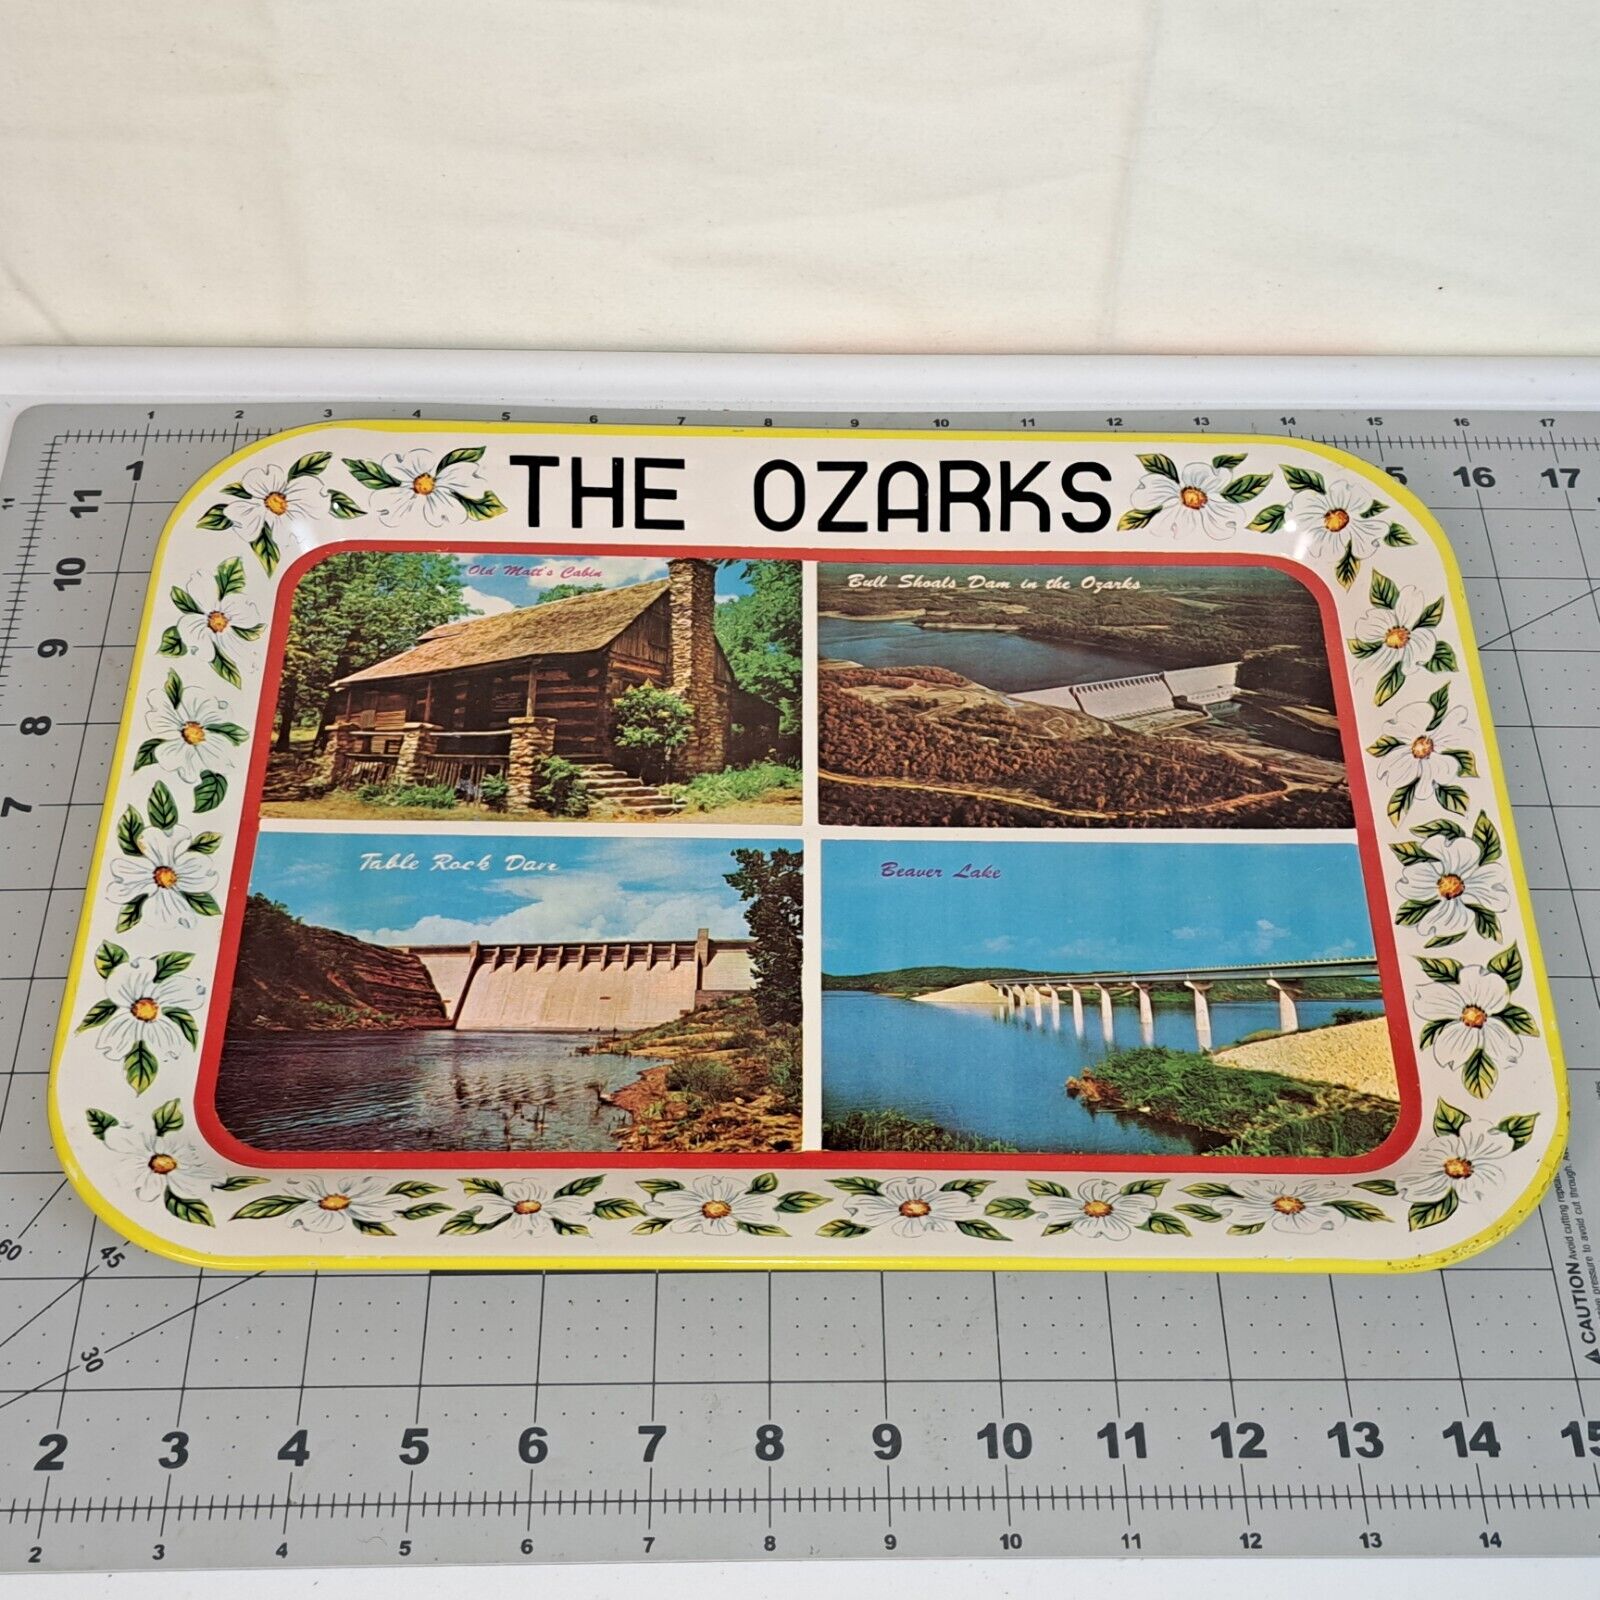 Vintage Made In Japan Serving Tray “ The OZARKS” Features Famous Tourist 13.5x10